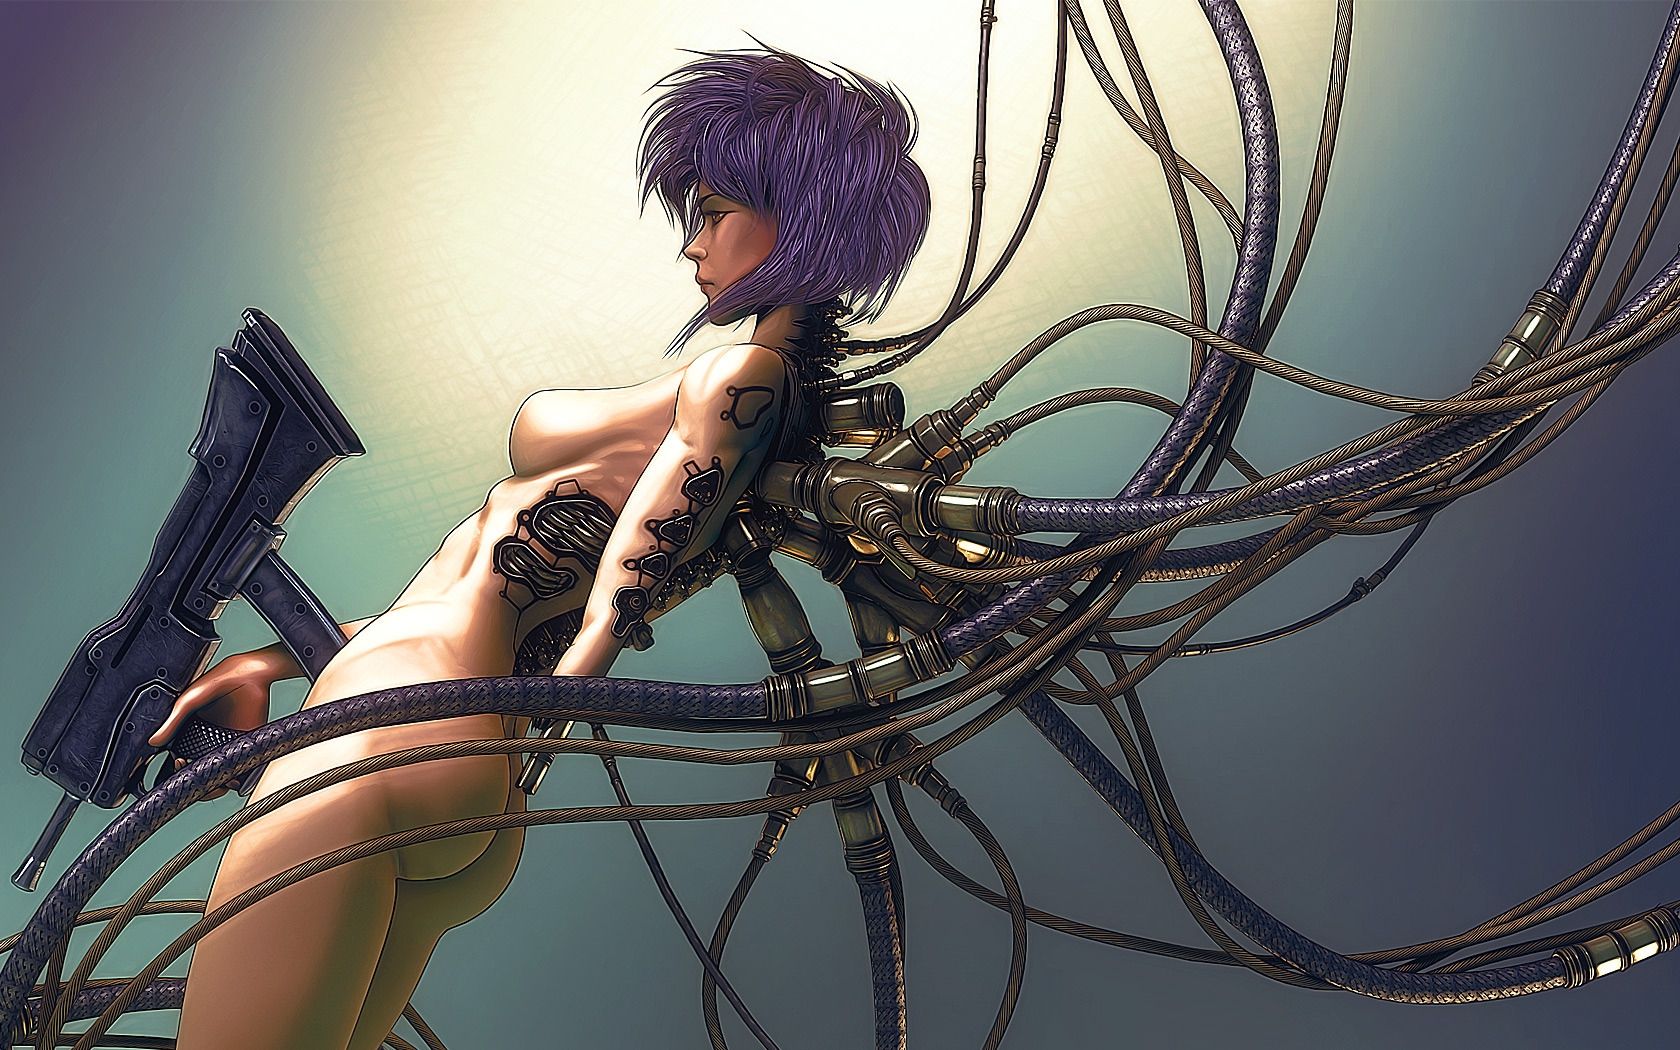 Artist Photographer Striker Ghost In The Shell Is Ics Series